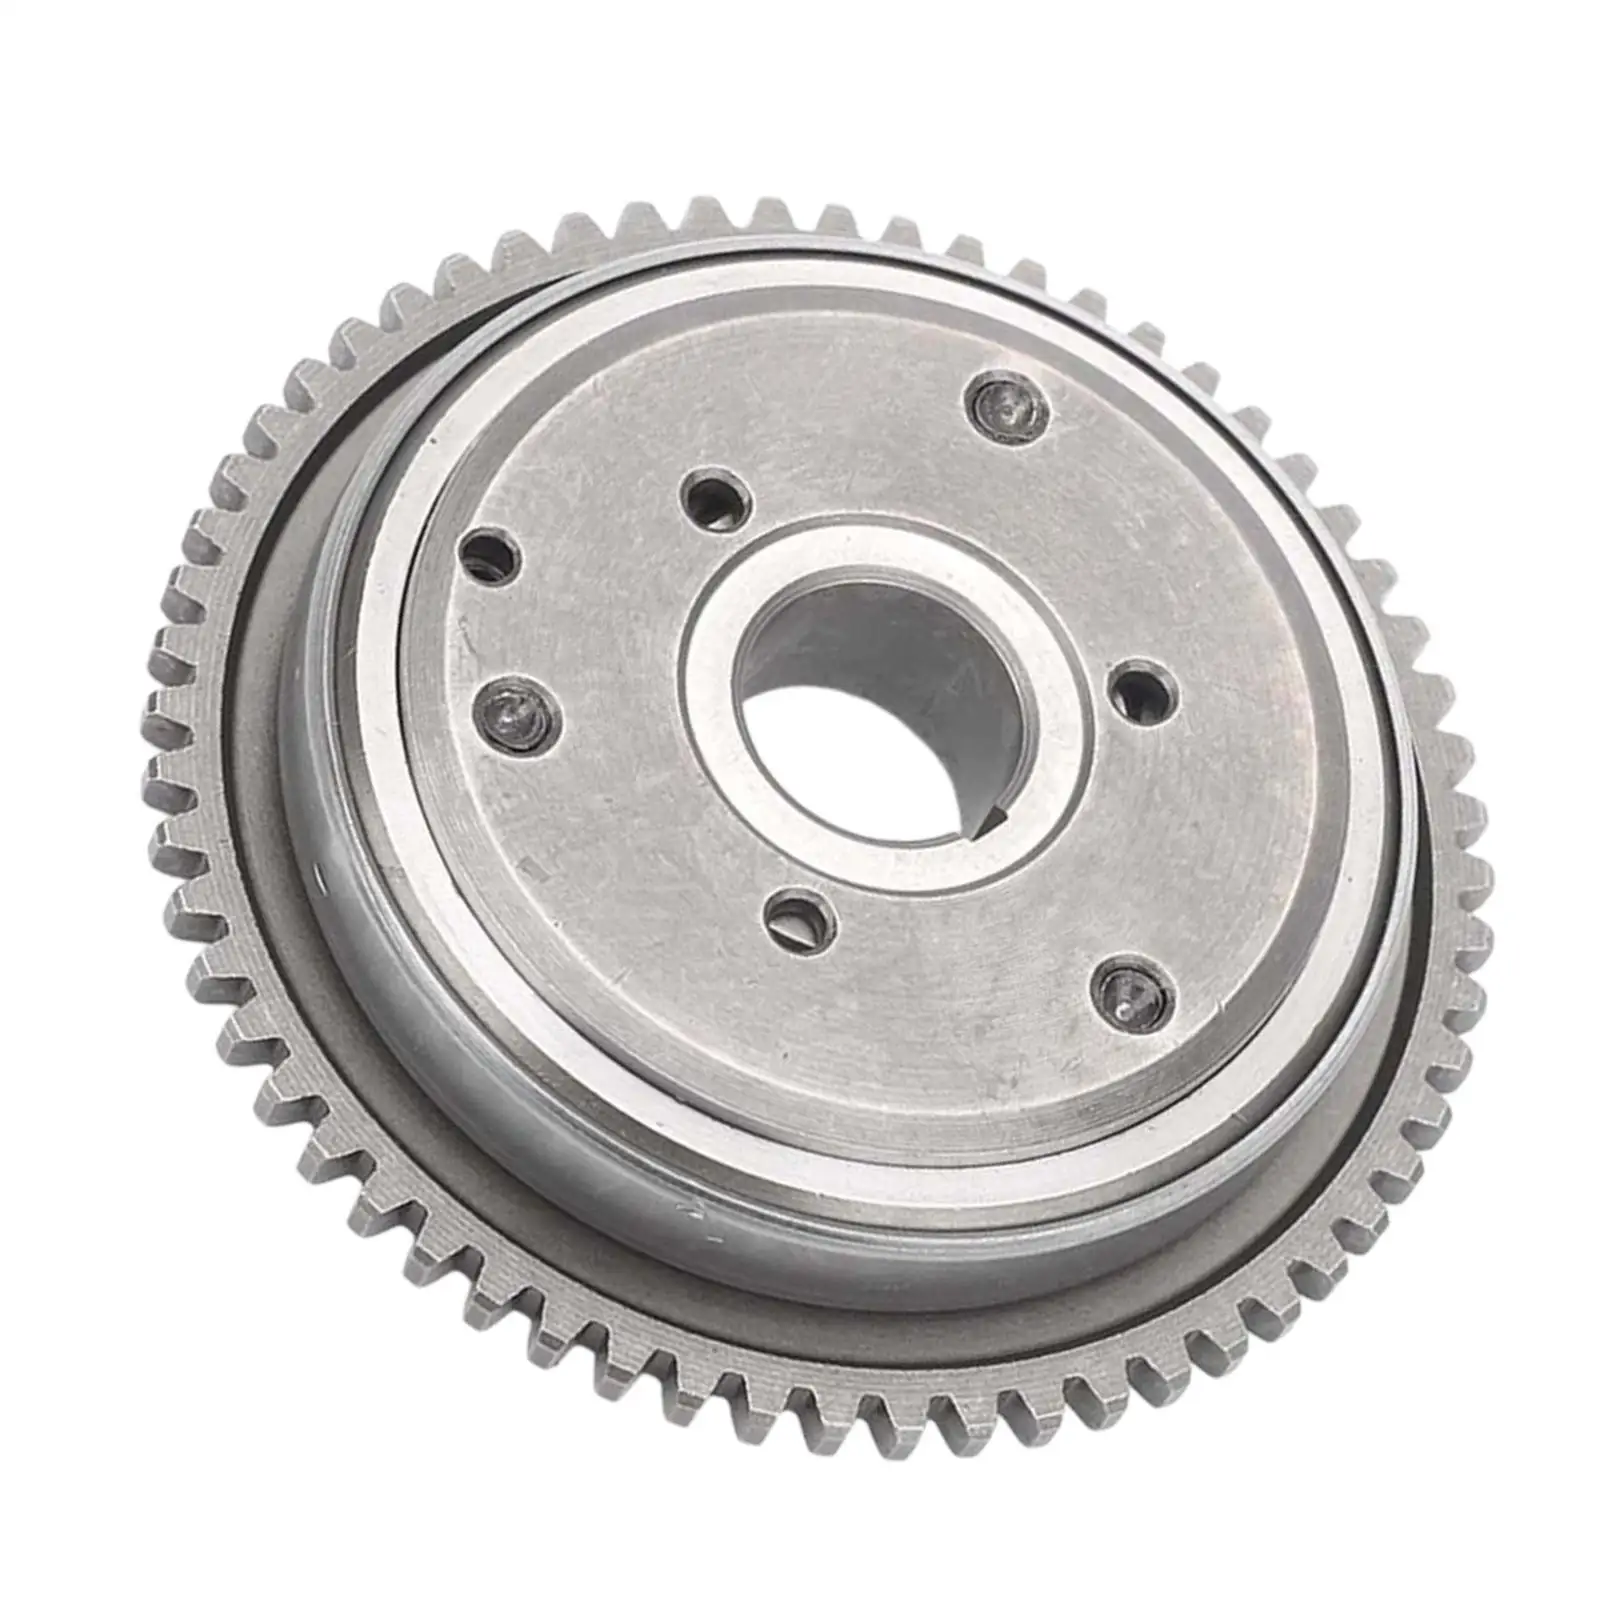 Starter Clutch Bearing Gear Premium Easy Installation Engine Start Clutch Assembly Replaces for 125cc 150cc 152qmi ATV Gy6